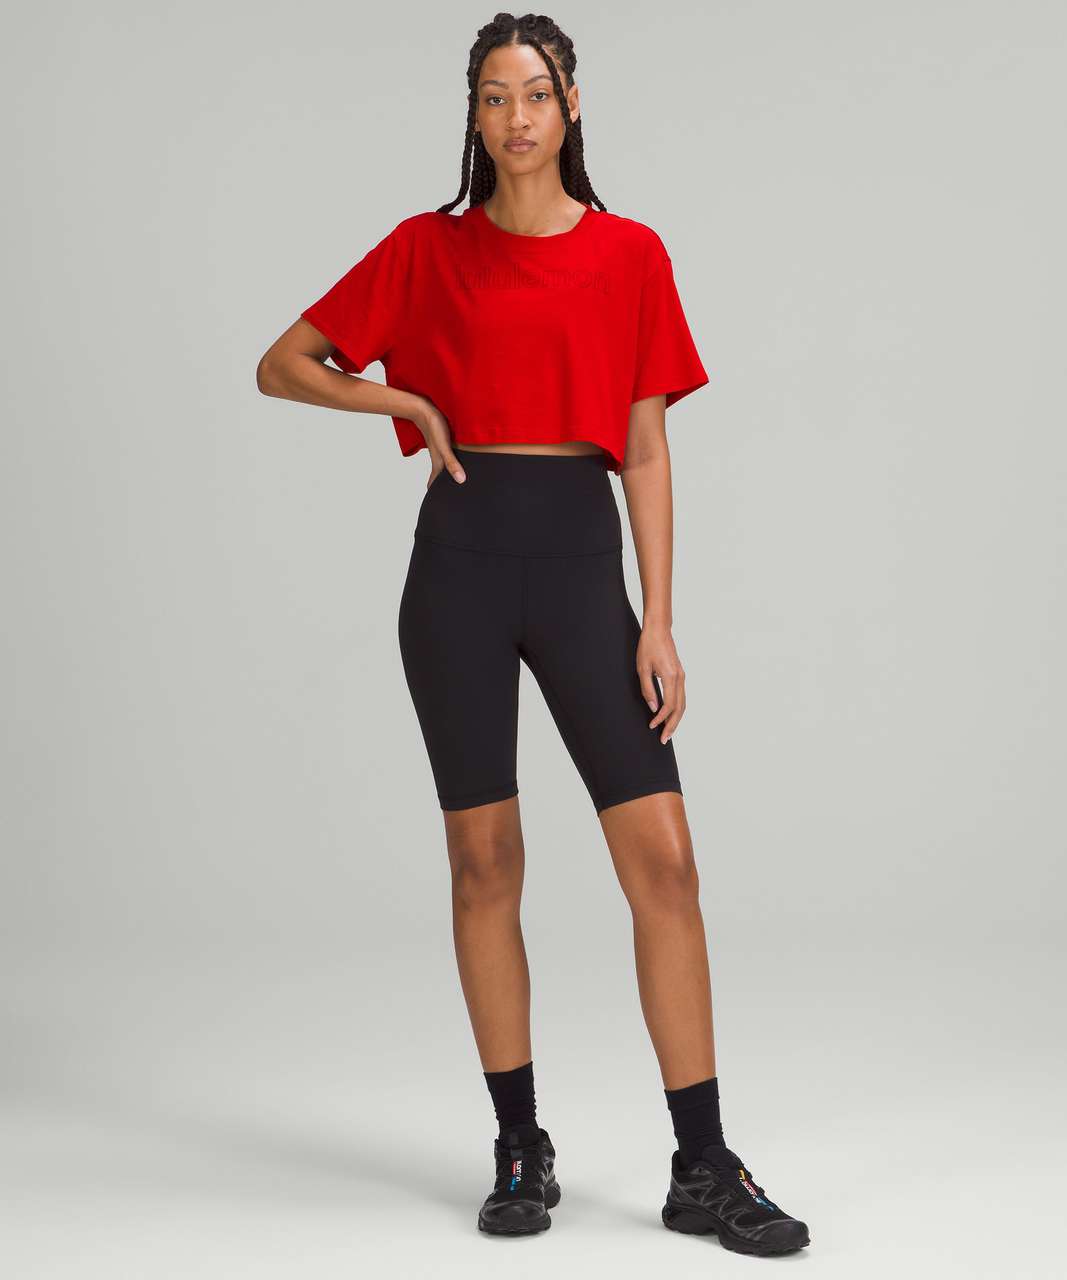 Lululemon All Yours Cropped Graphic T-Shirt - Dark Red